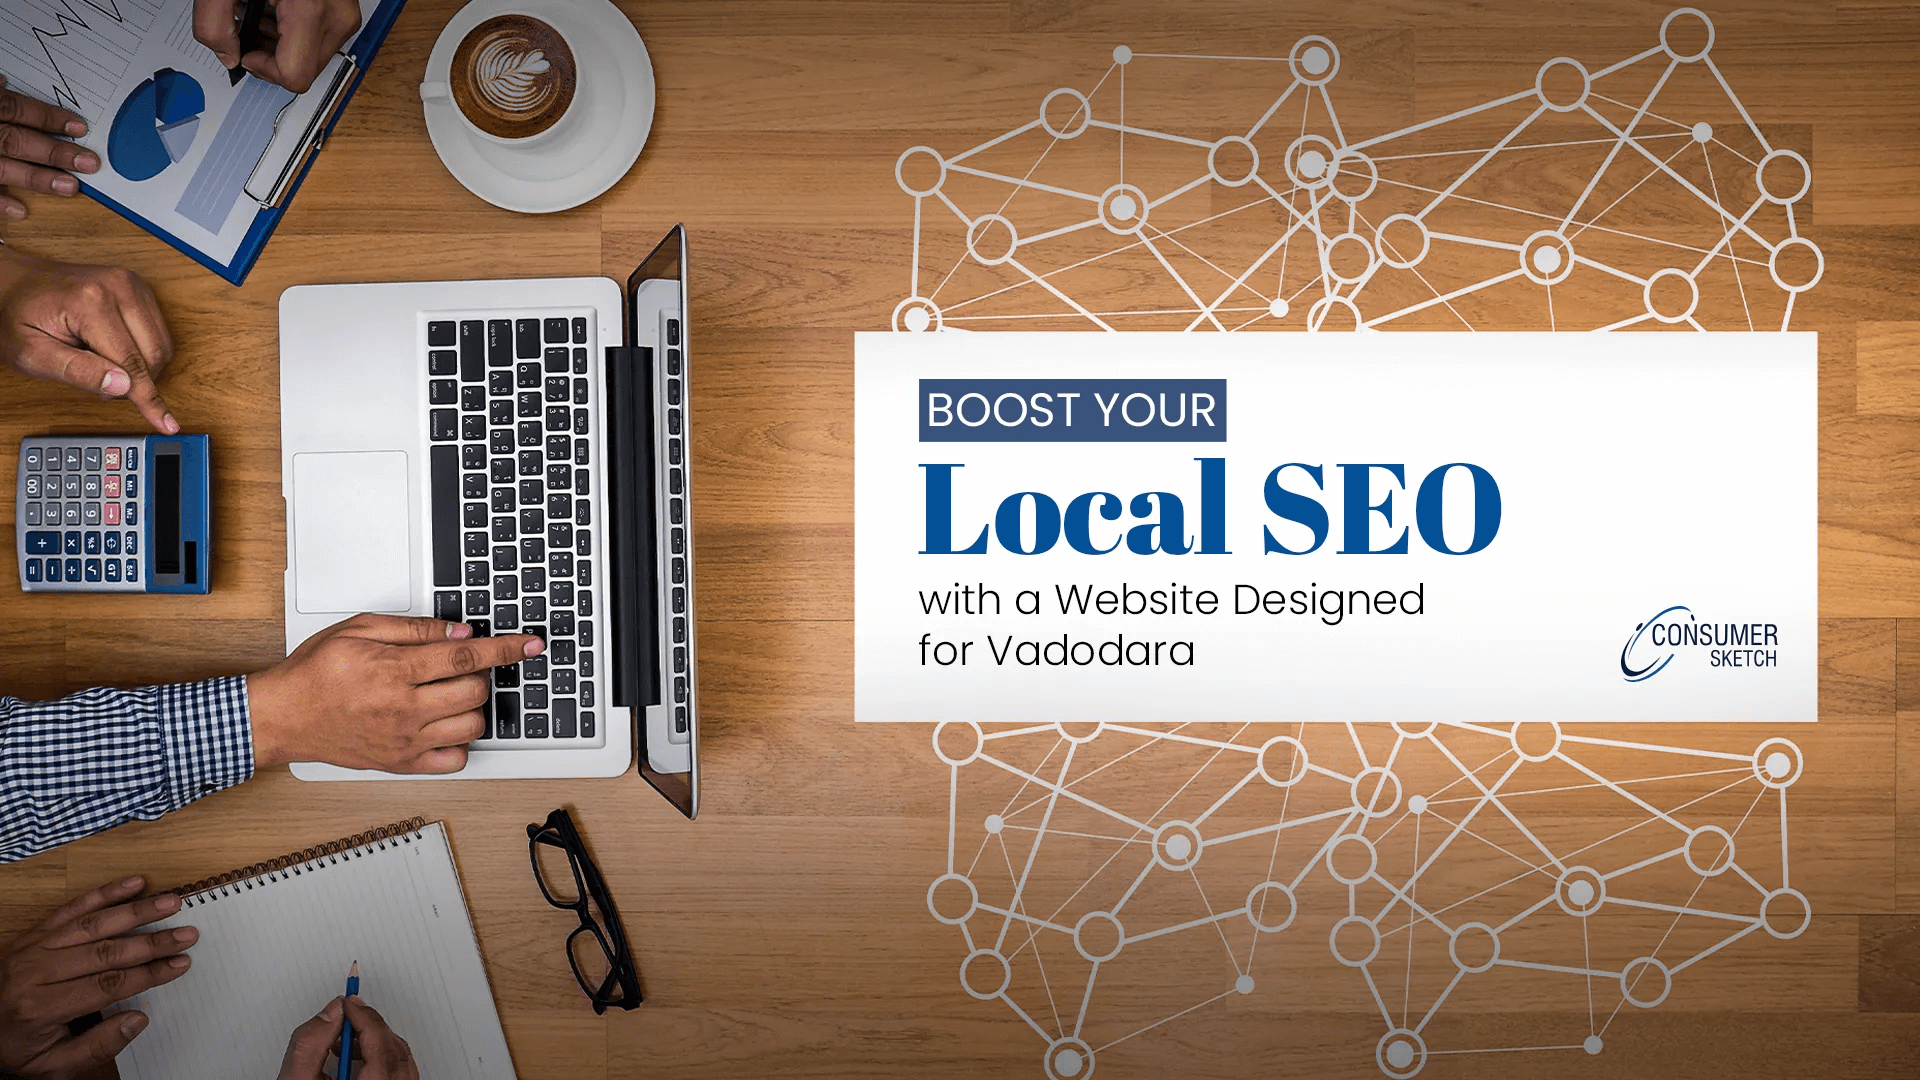 Boost Your Local SEO with a Website Designed for Vadodara